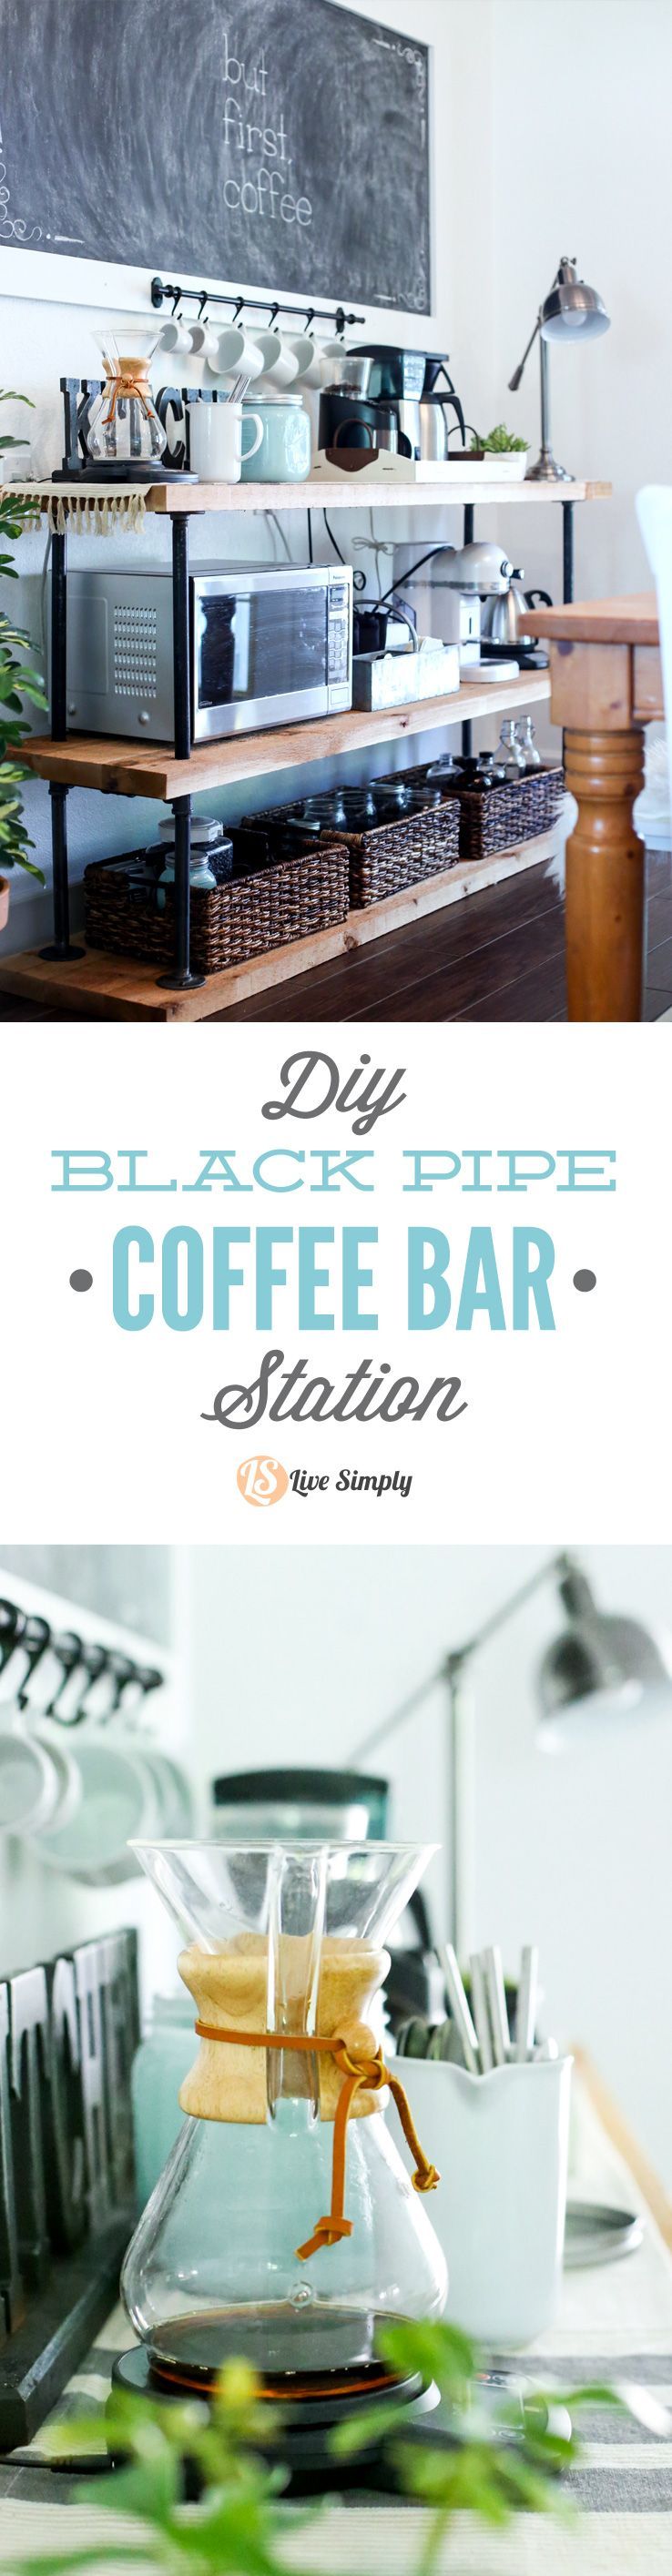 Build your own coffee bar! This project is made with industrial-style black pipes and wood–thats